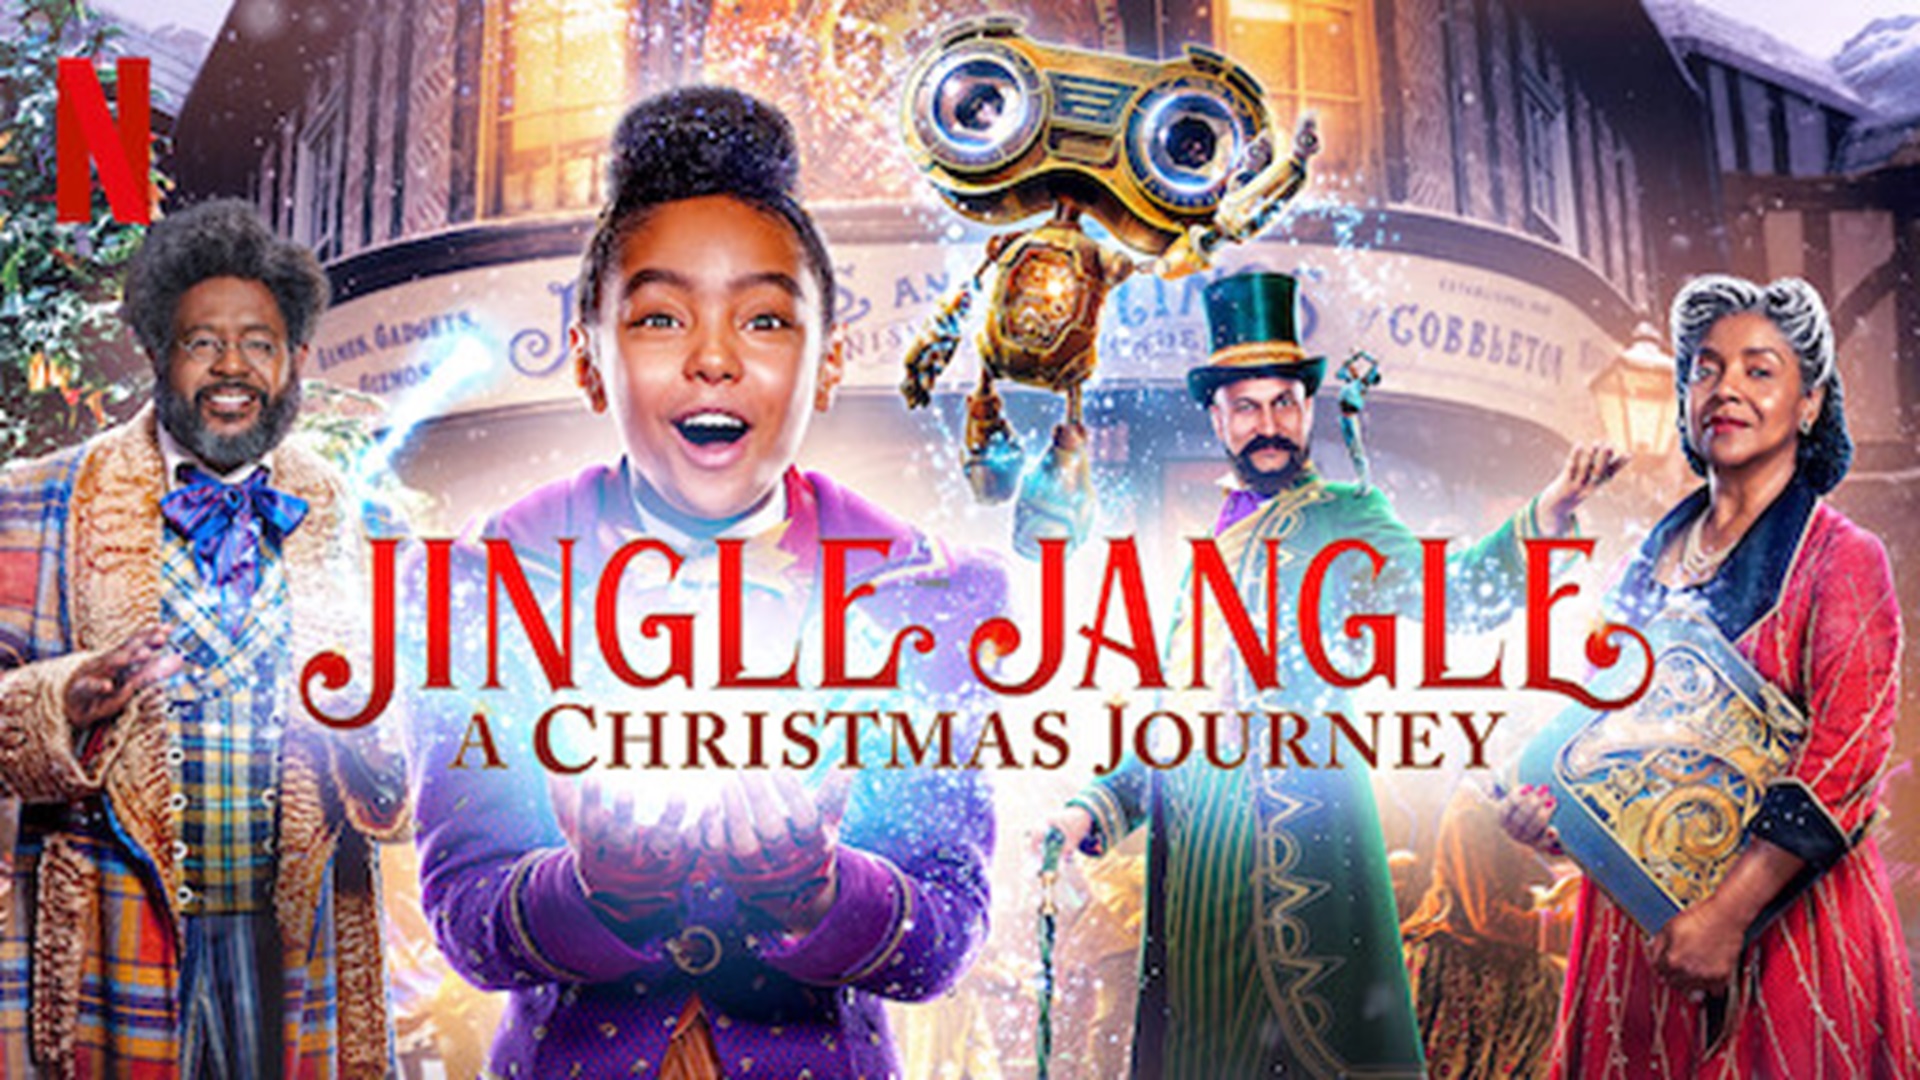 <p>This is a gentle, modern fantasy film that will keep both you and the kids entertained! The costumes and the musical numbers are wonderful, and the story is rather sweet.</p>